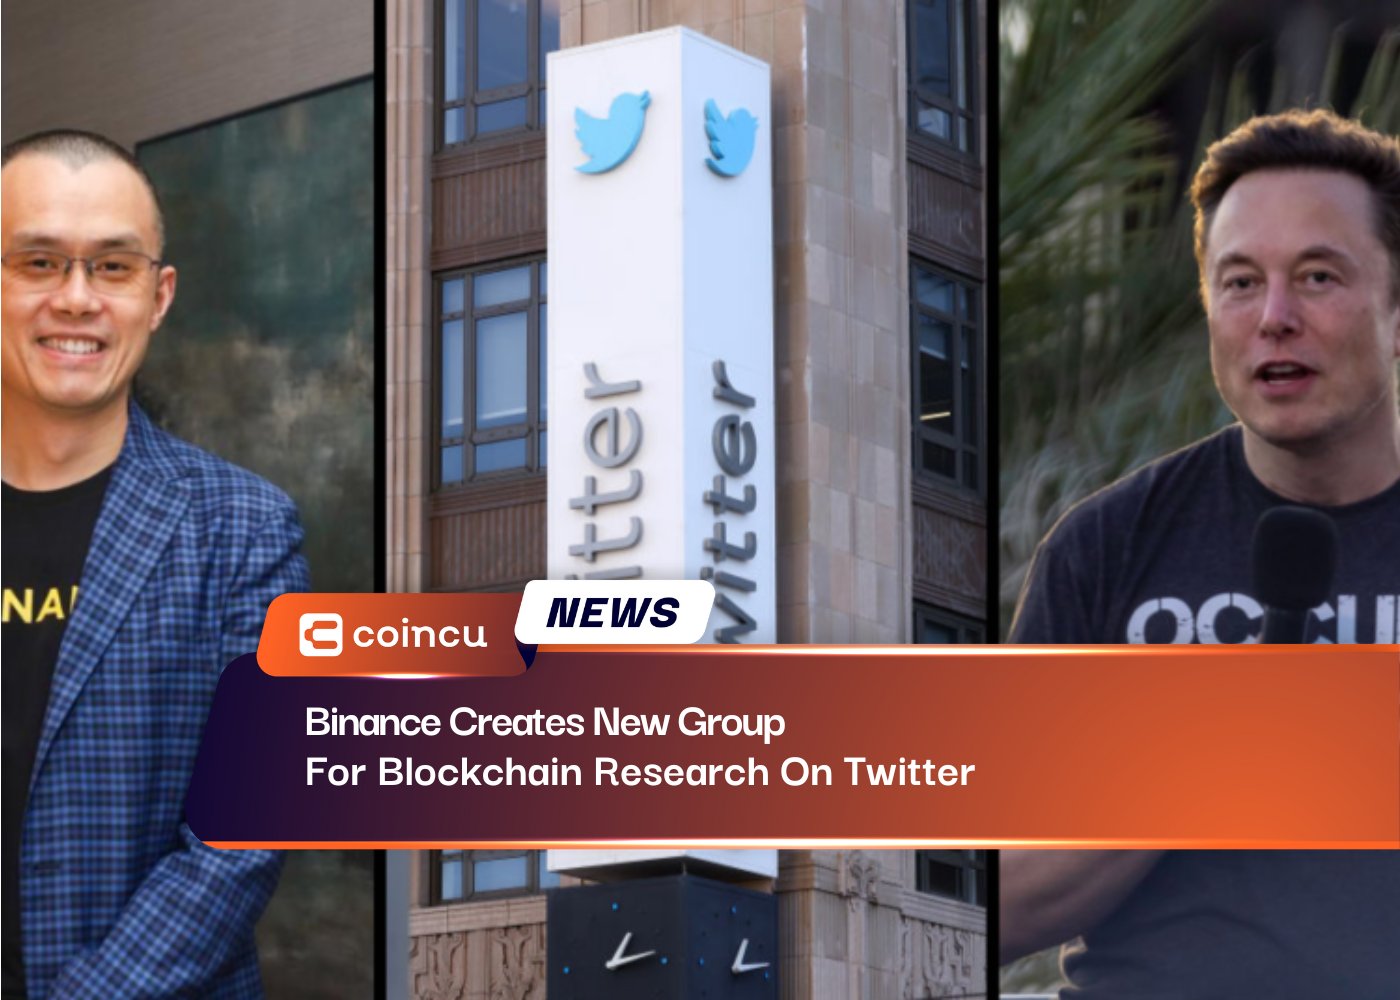 Binance Creates New Group For Blockchain Research On Twitter